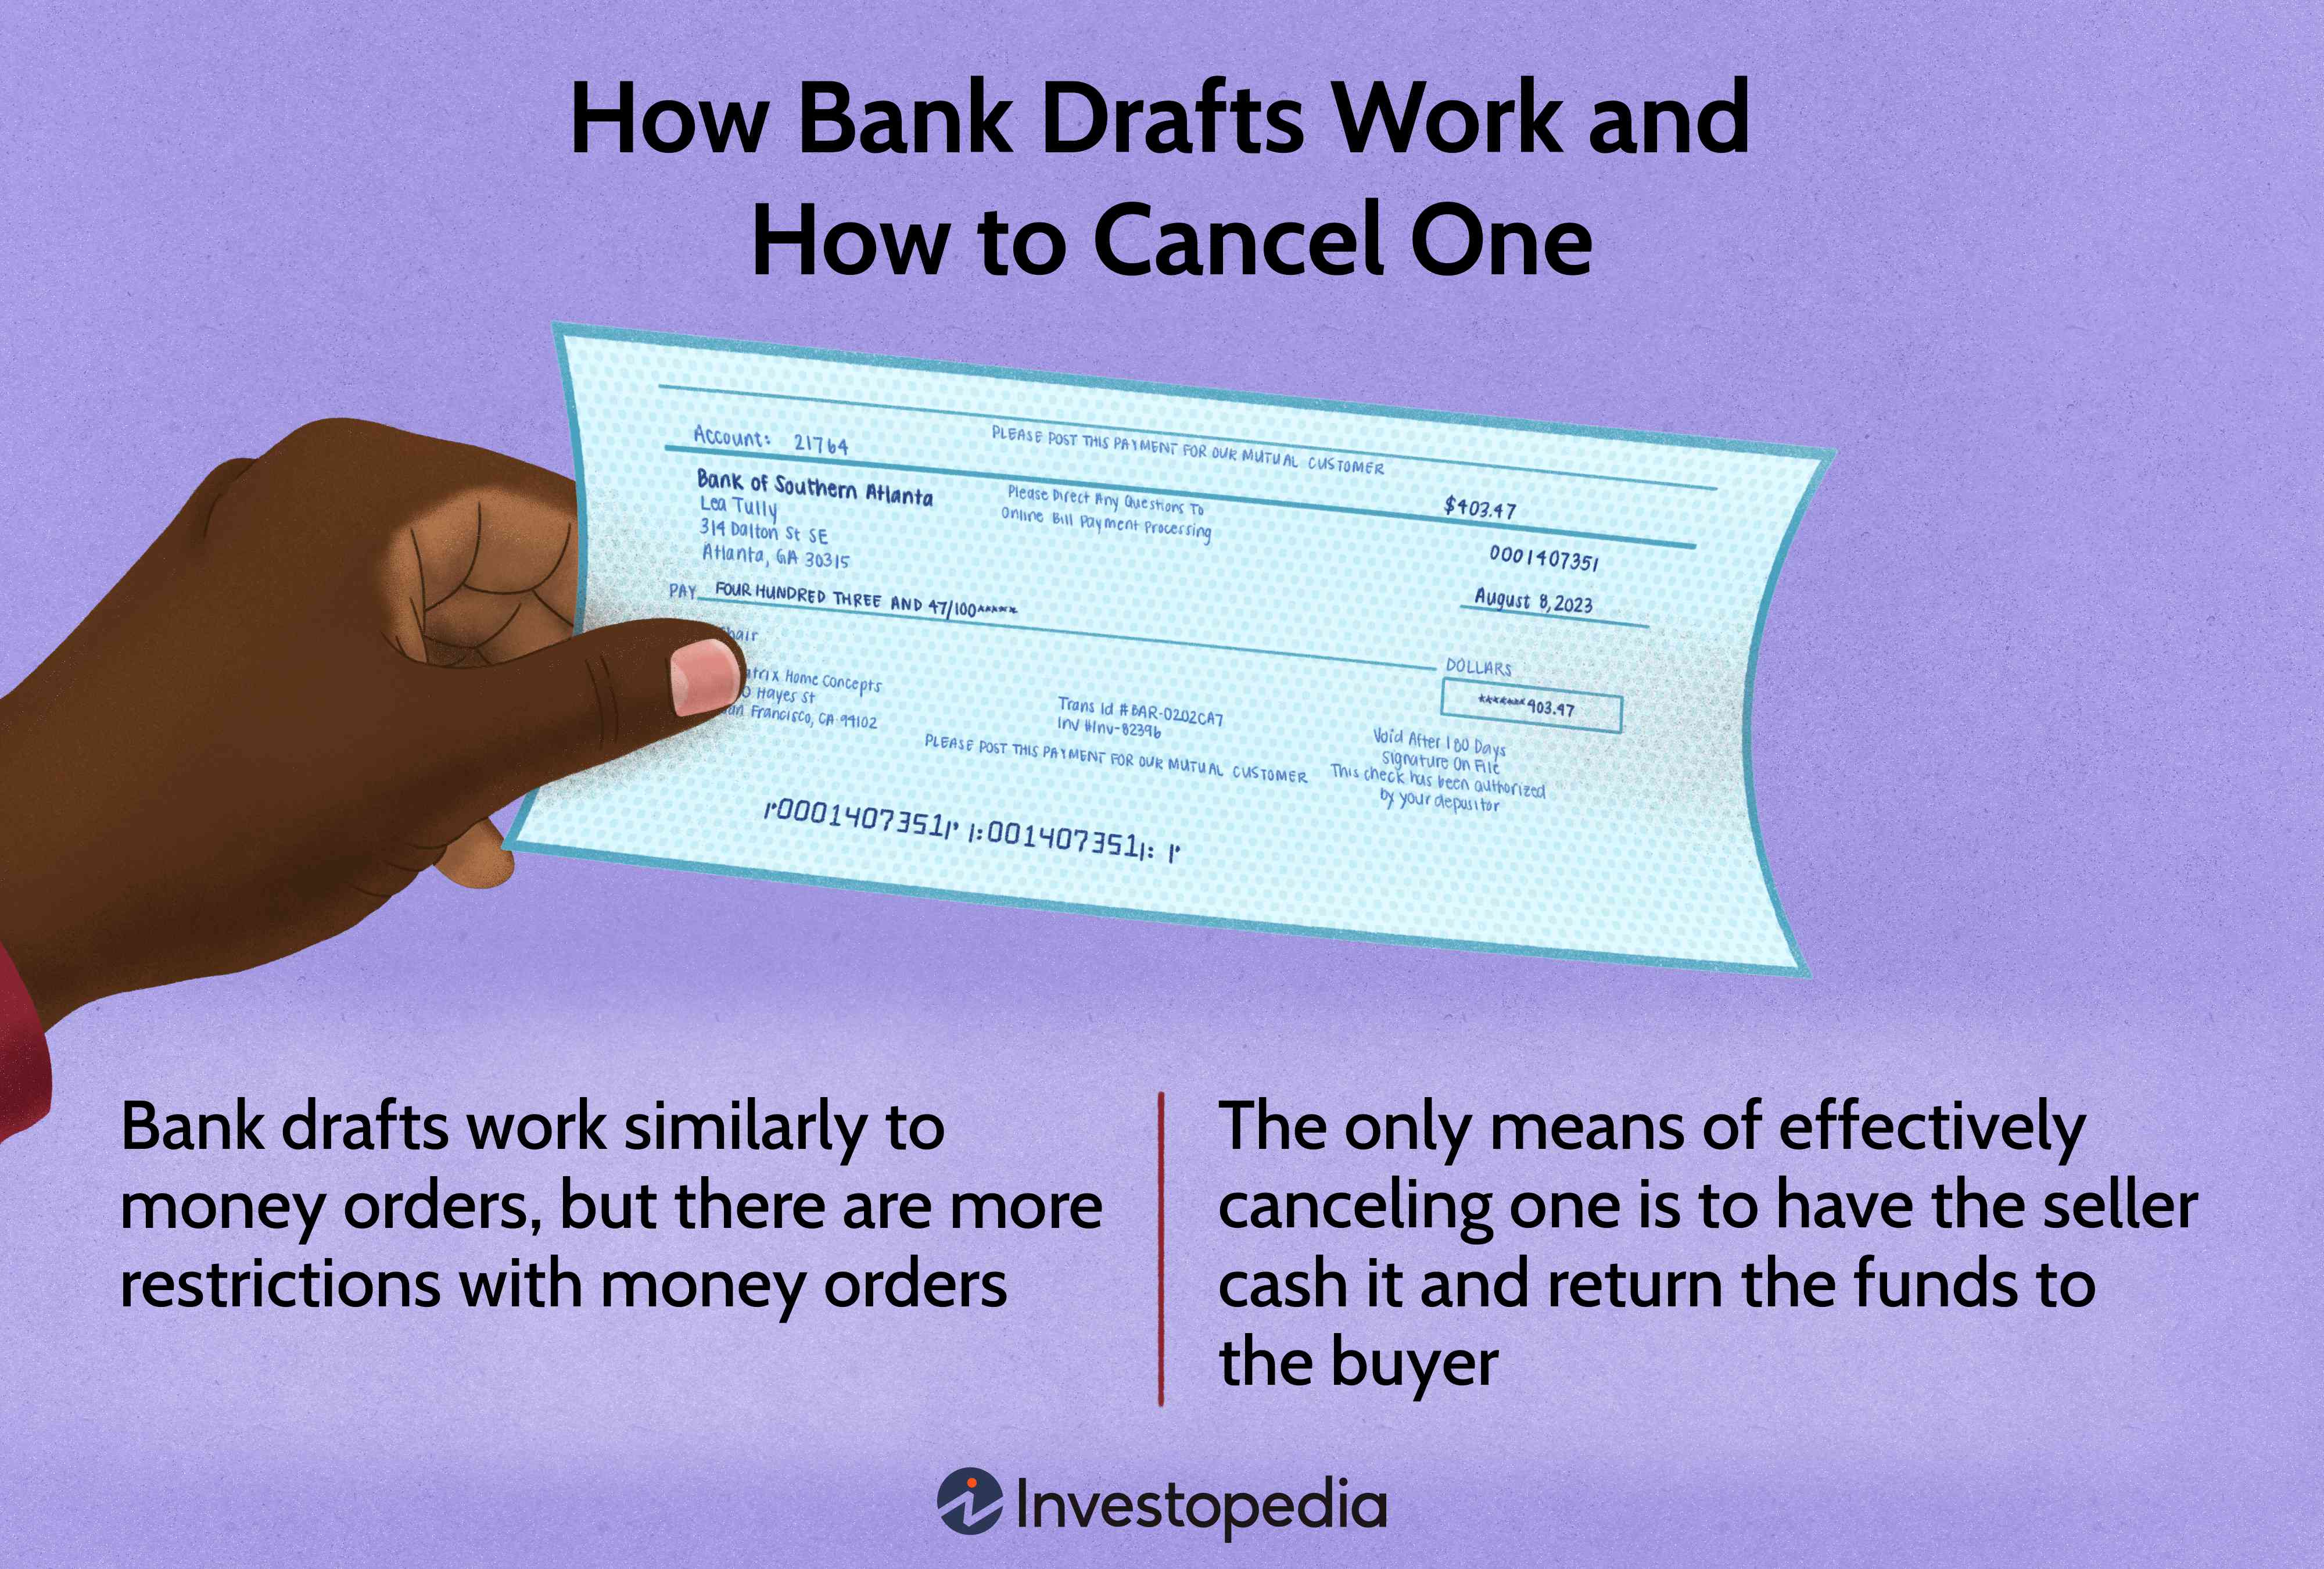 How Bank Drafts Work and How to Cancel One